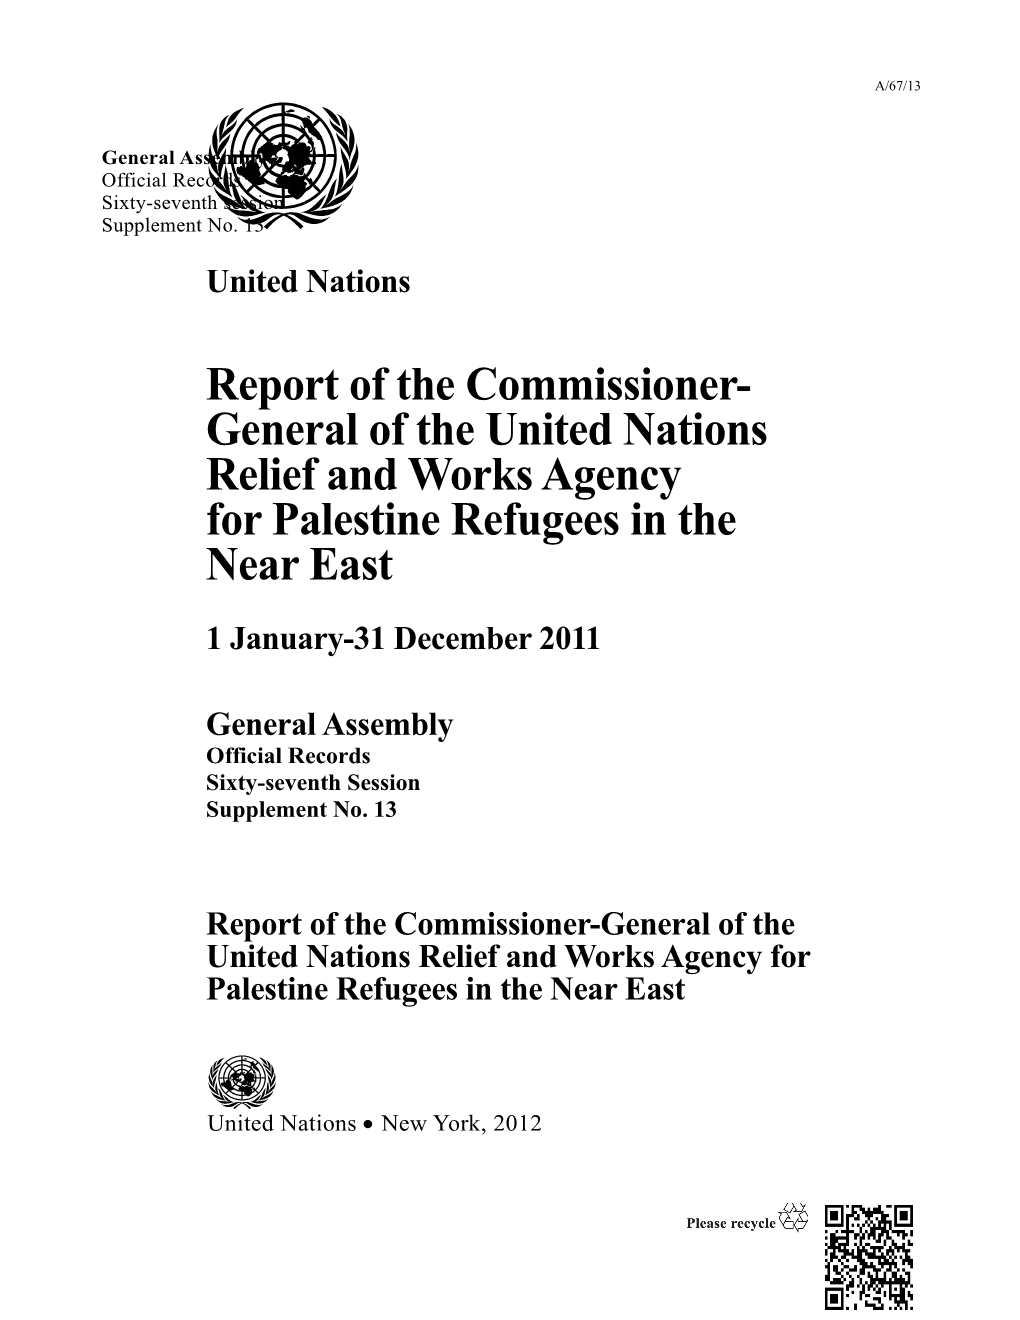 Report of the Commissioner-General of the United Nations Relief and Works Agency for Palestine